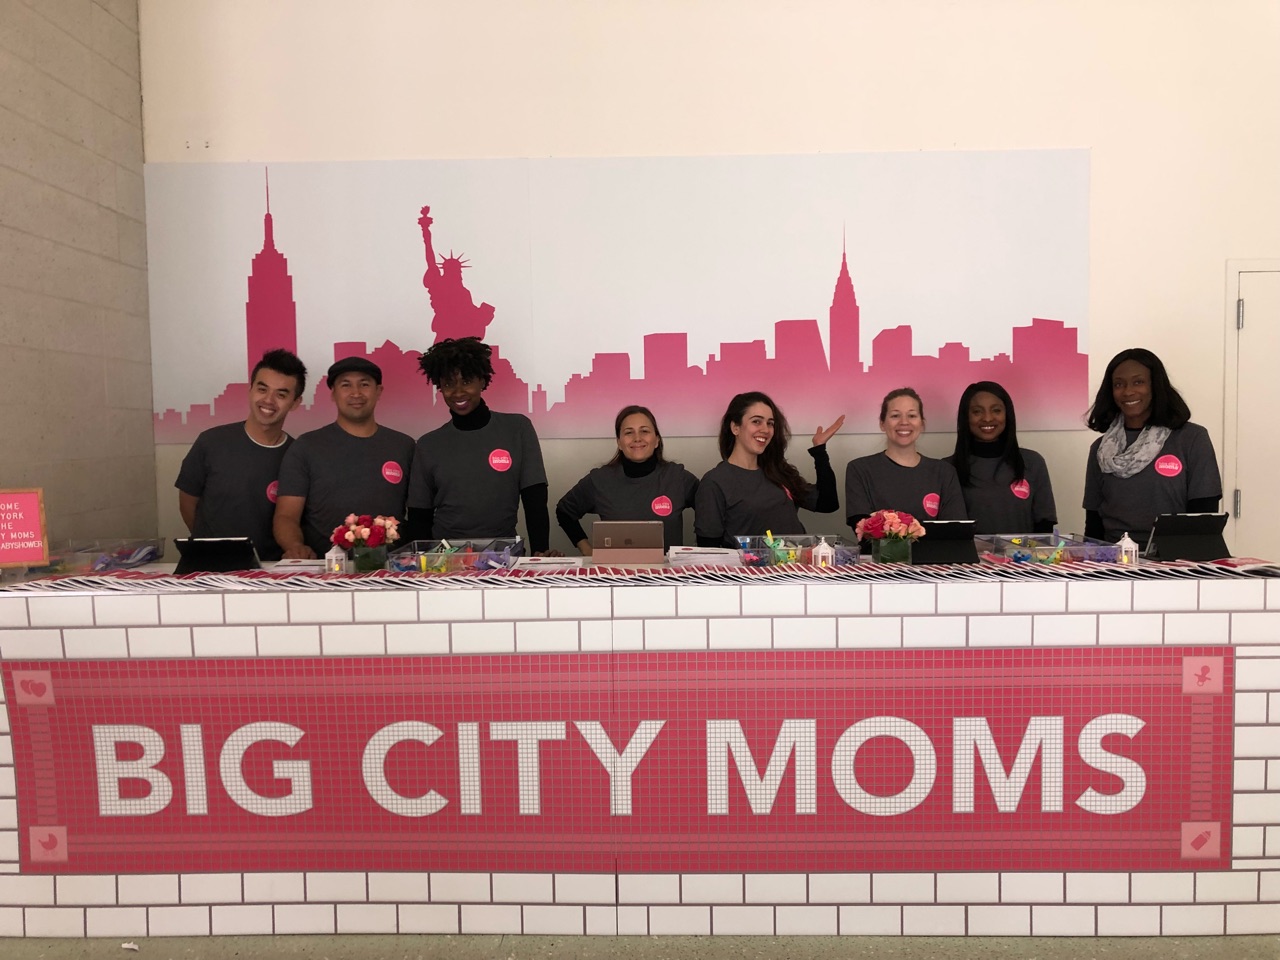 A Mother's Day ba&sh Fashion Event with Stroller in the City